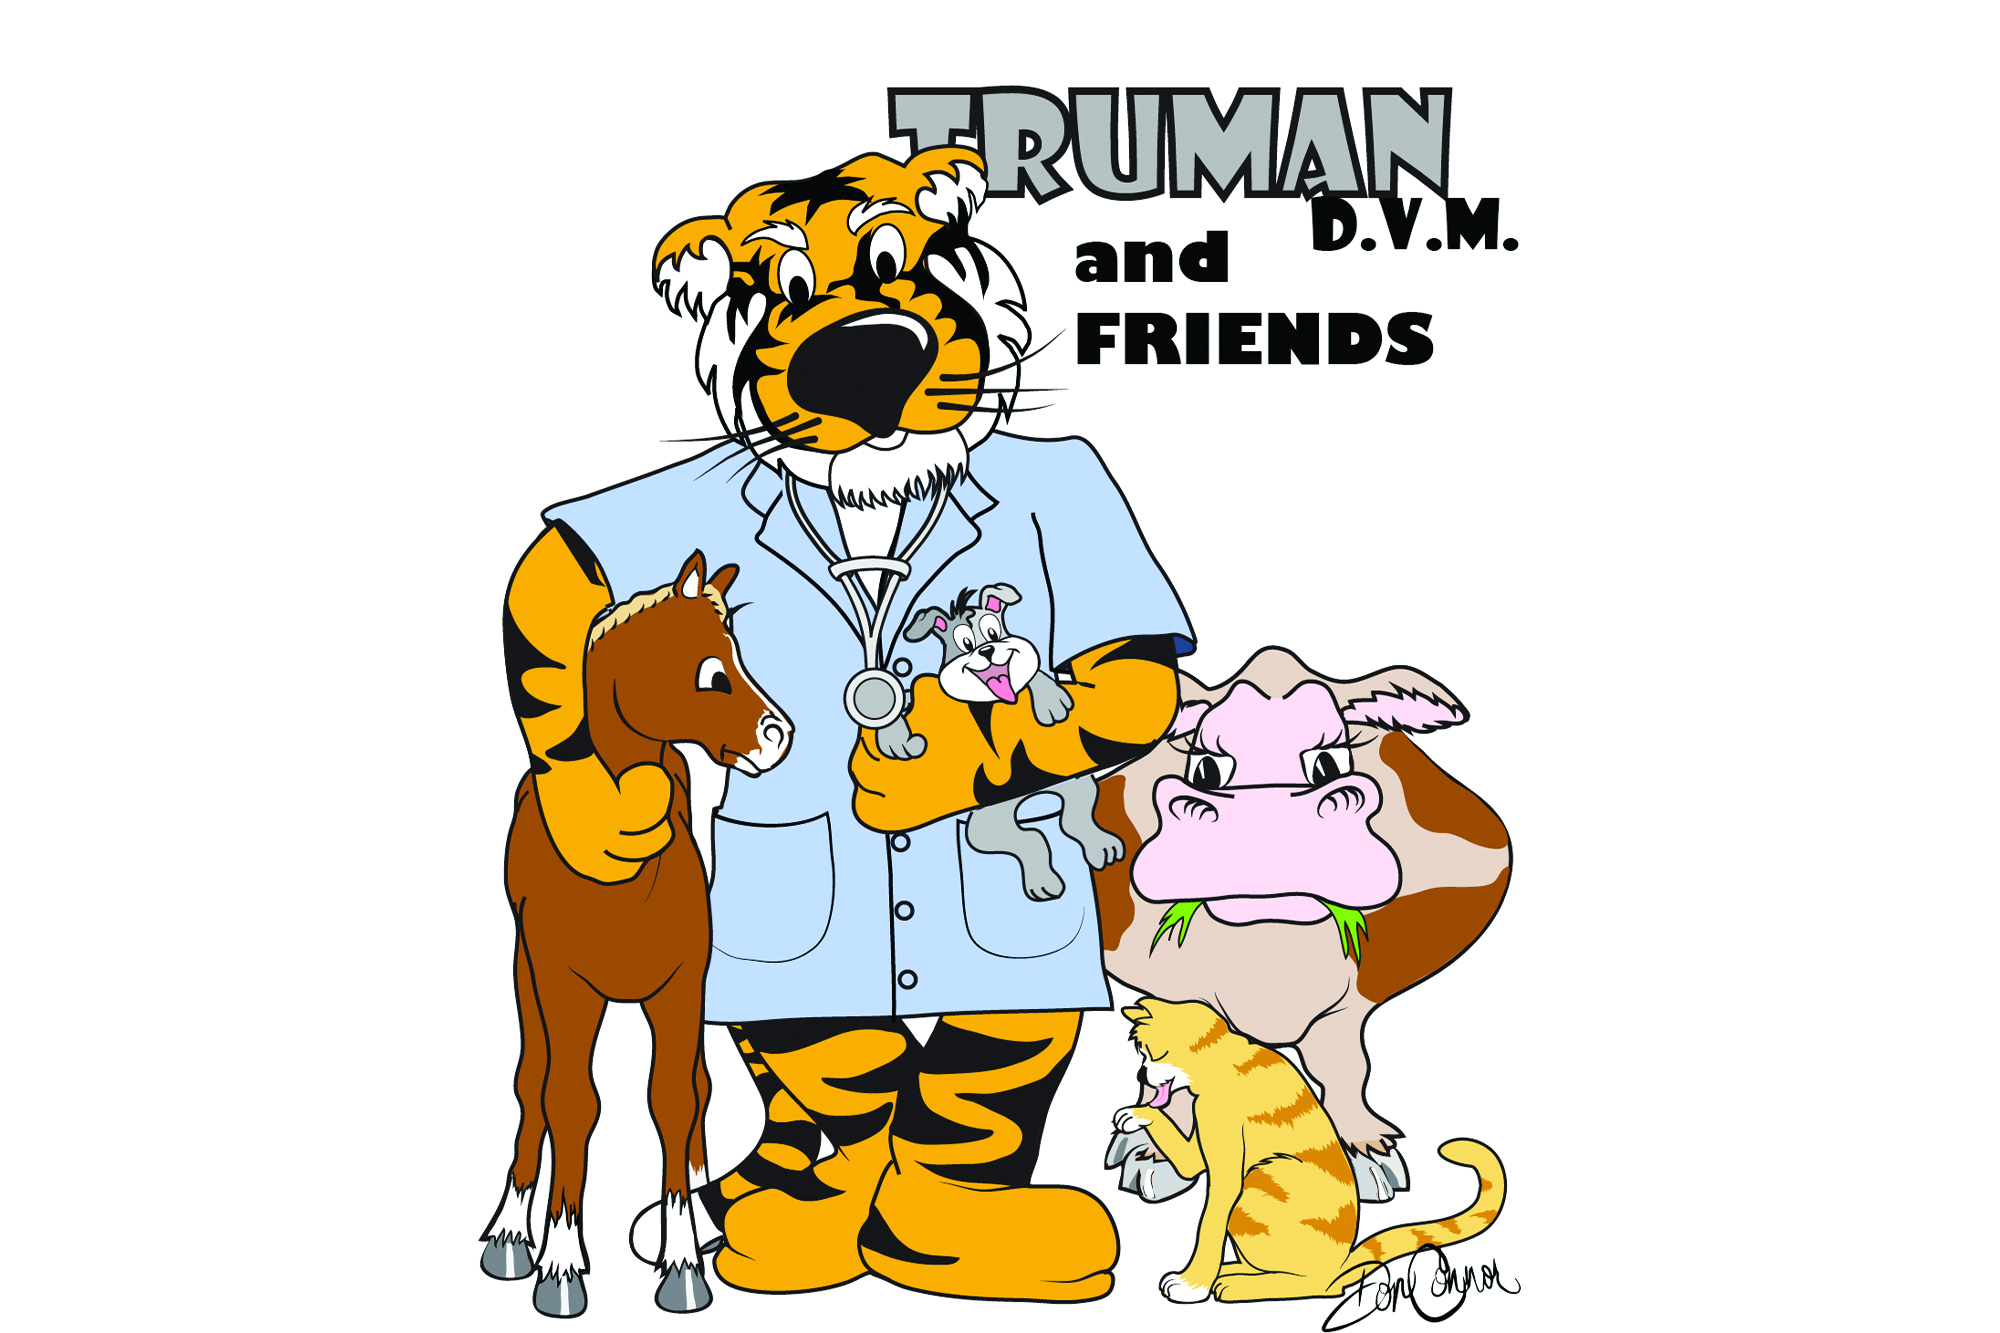 truman D.V.M. and friends graphic illustrated by don connor. features truman and some animals.